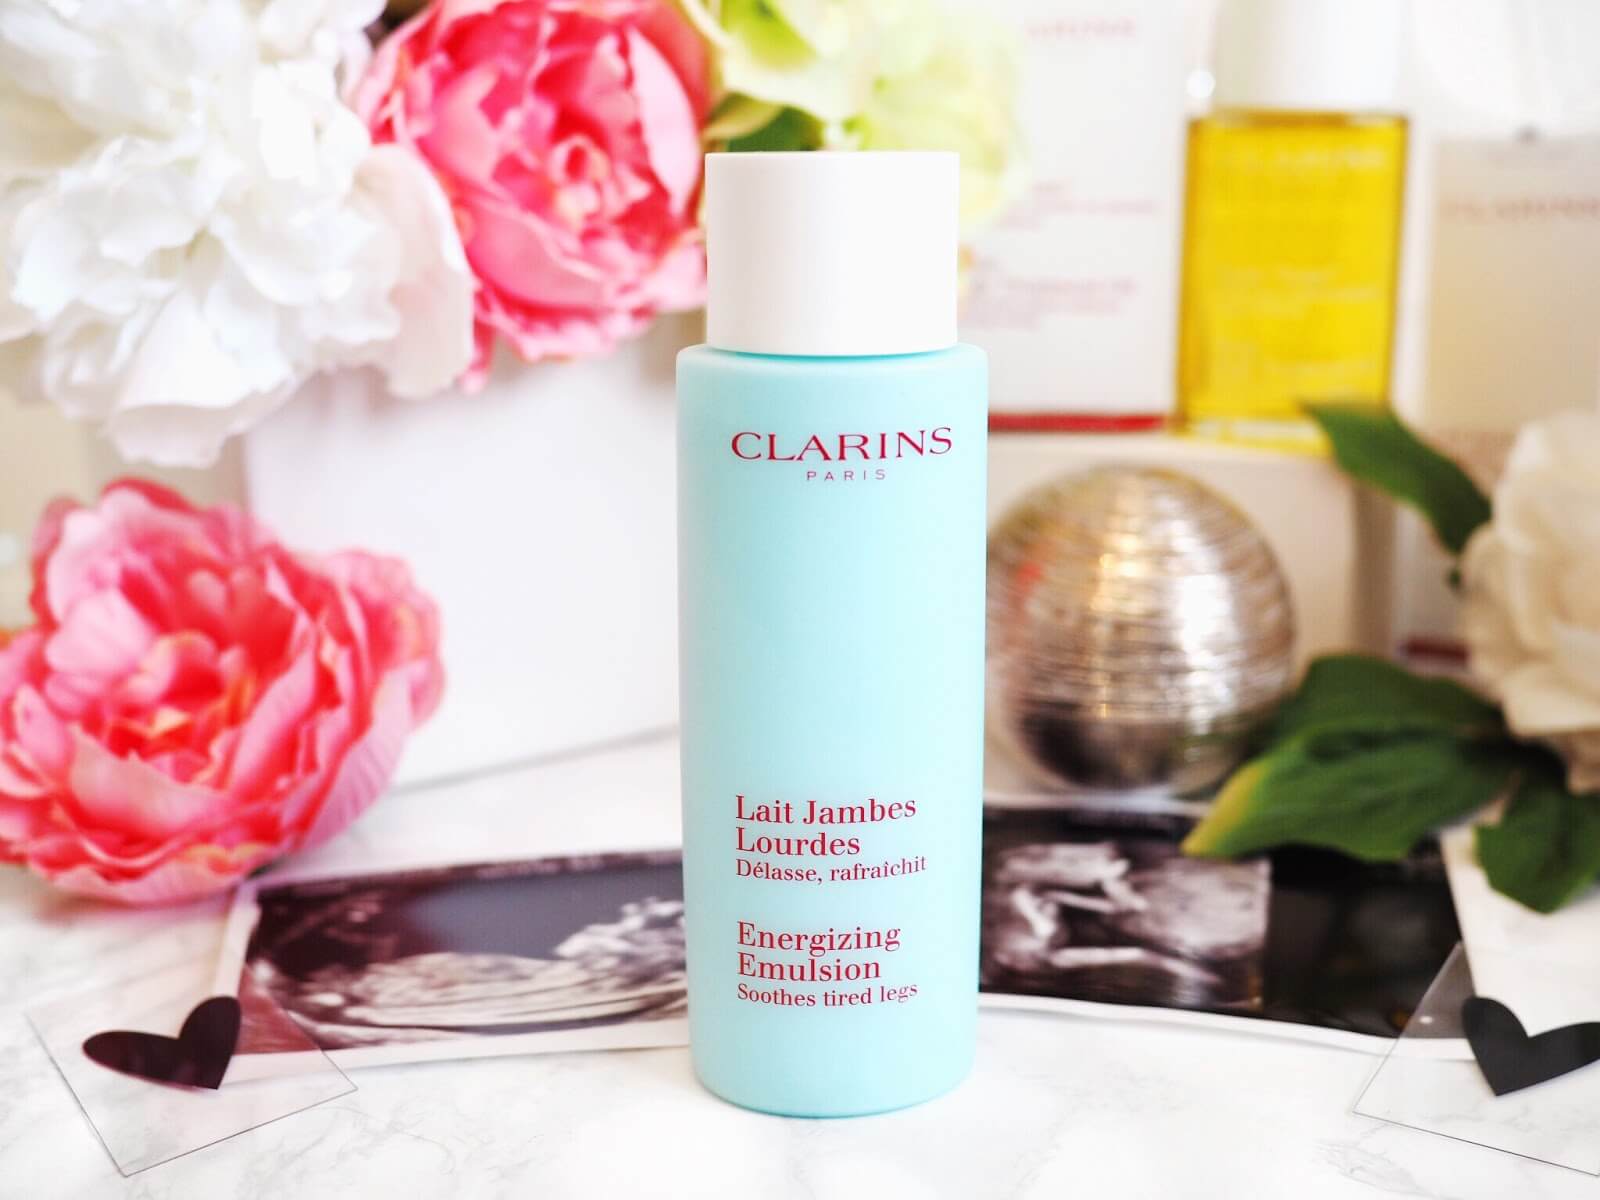 CLARINS,CLARINS Energizing Emulsion Soothes Tired Legs 30ml,CLARINS Energizing Emulsion Soothes Tired Legs,CLARINS Energizing Emulsion Soothes Tired Legs รีวิว,CLARINS Energizing Emulsion Soothes Tired Legs ราคา,